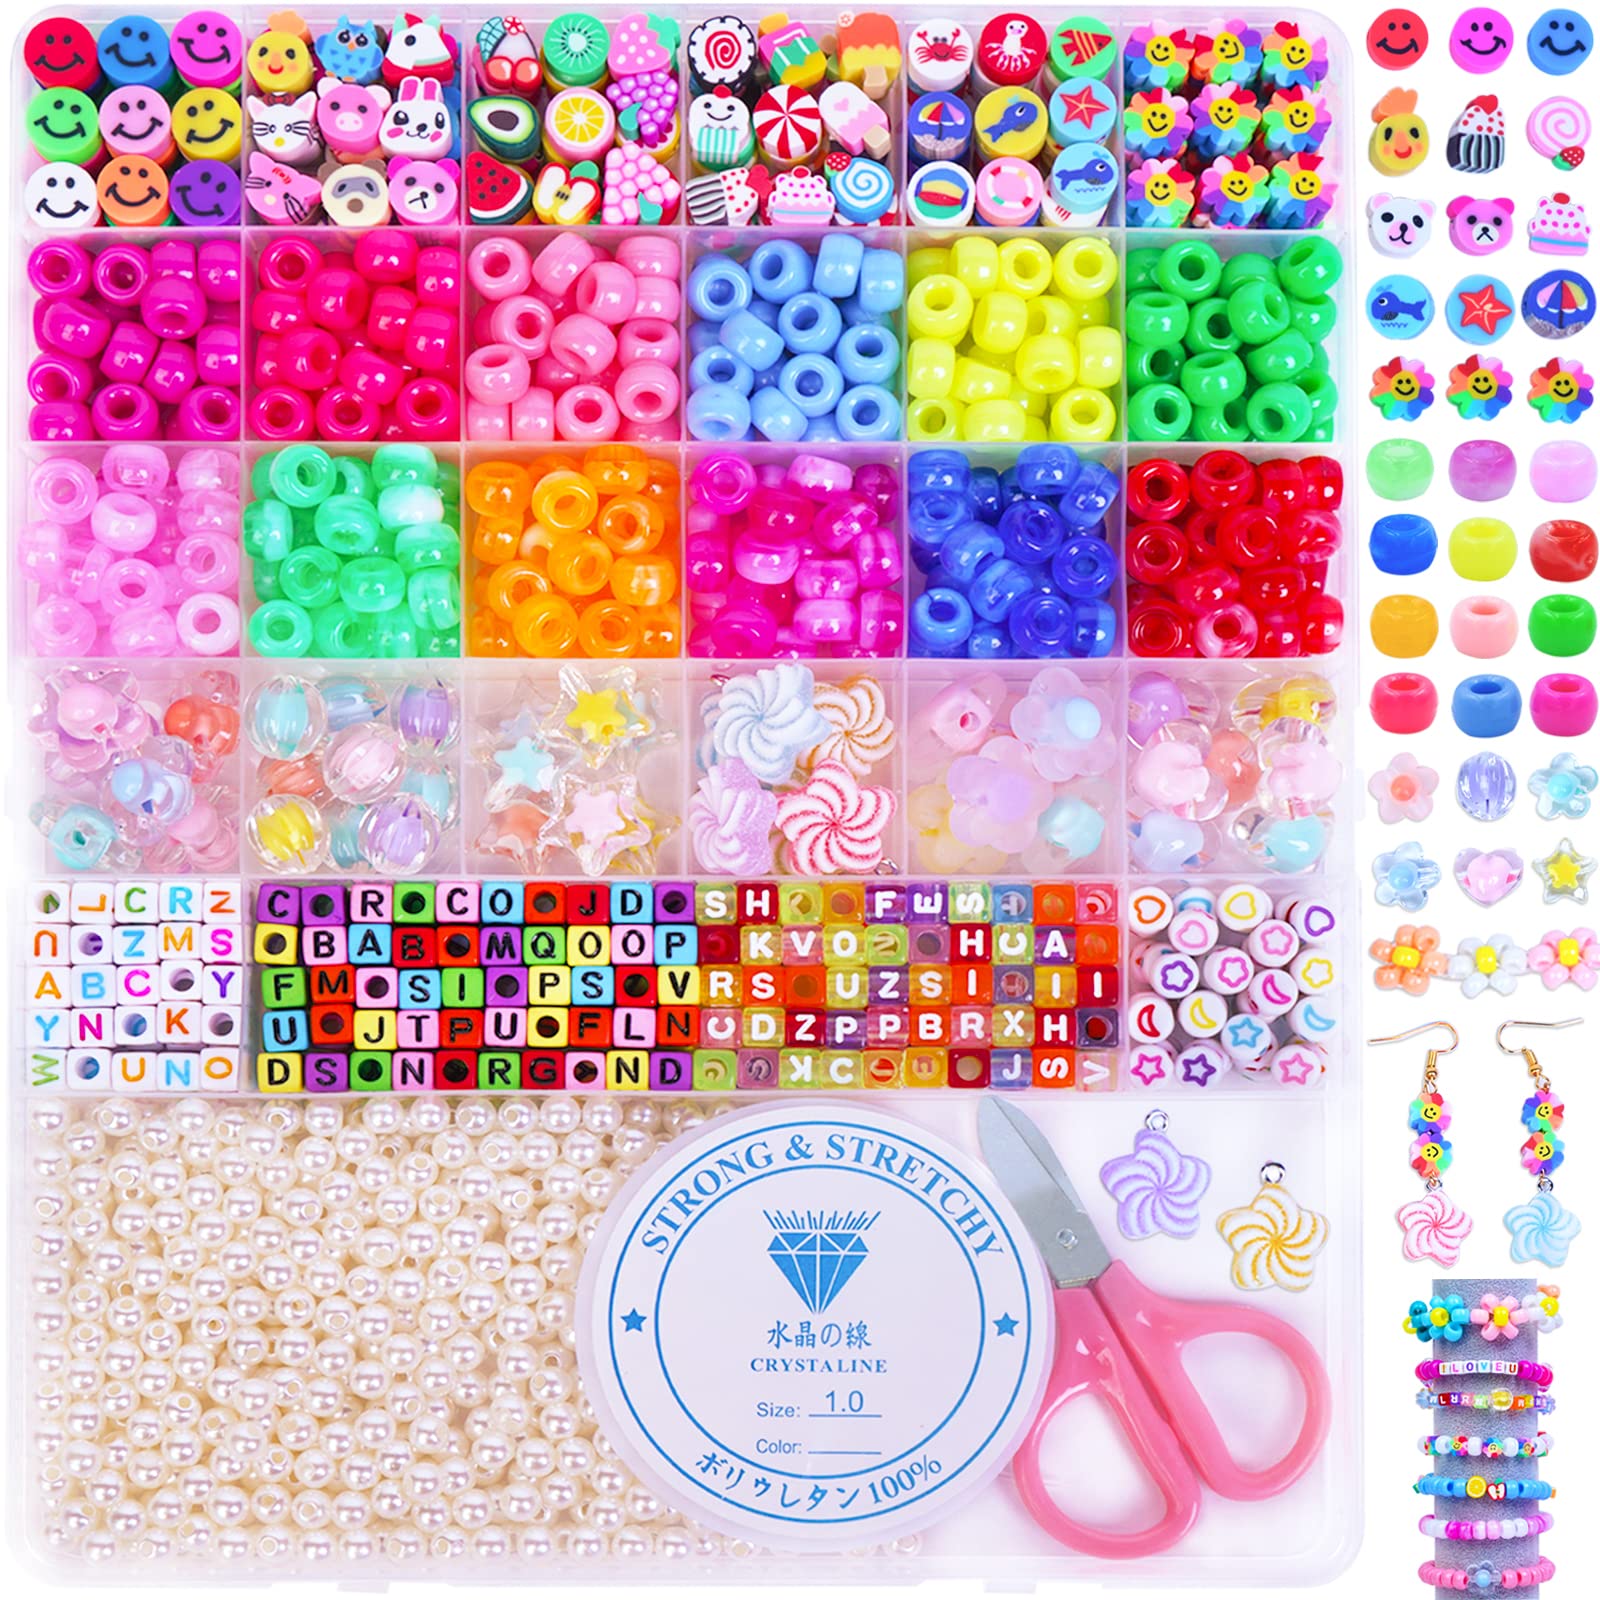 MontoSun Bead Bracelet Making Kit Pony Beads Polymer Clay Beads for Bracelets  Making Charms Beads Flower Smiley Letter Beads for Jewelry Making DIY Art  and Crafts Gifts for Girls age 4 5 6 7 8 9 10-12